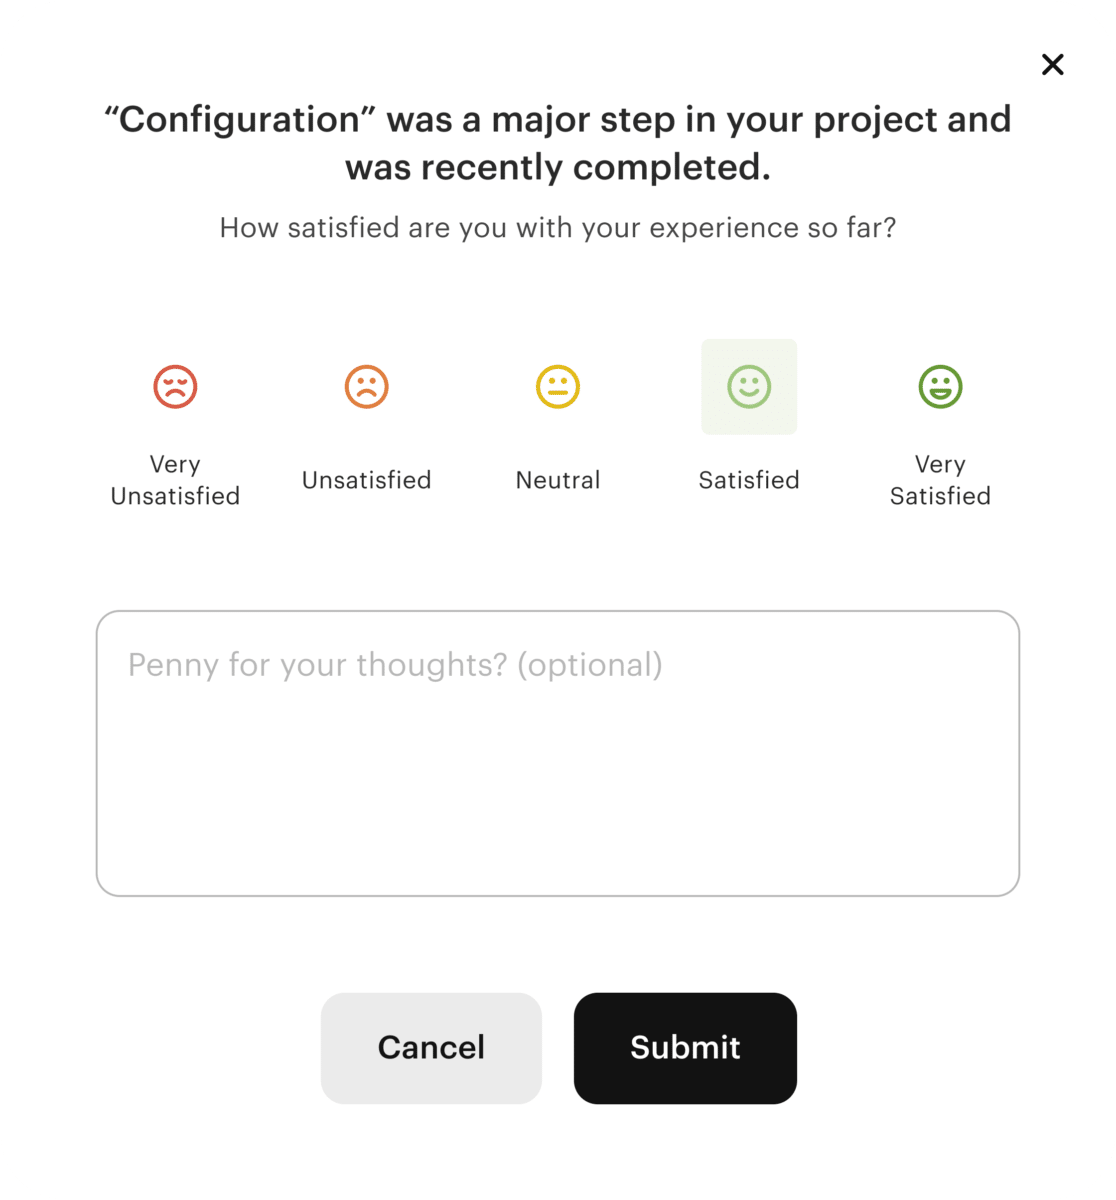 CSAT survey example asking how satisfied with your experience you are and providing faces to choose a box to write in and a cancel and submit button.